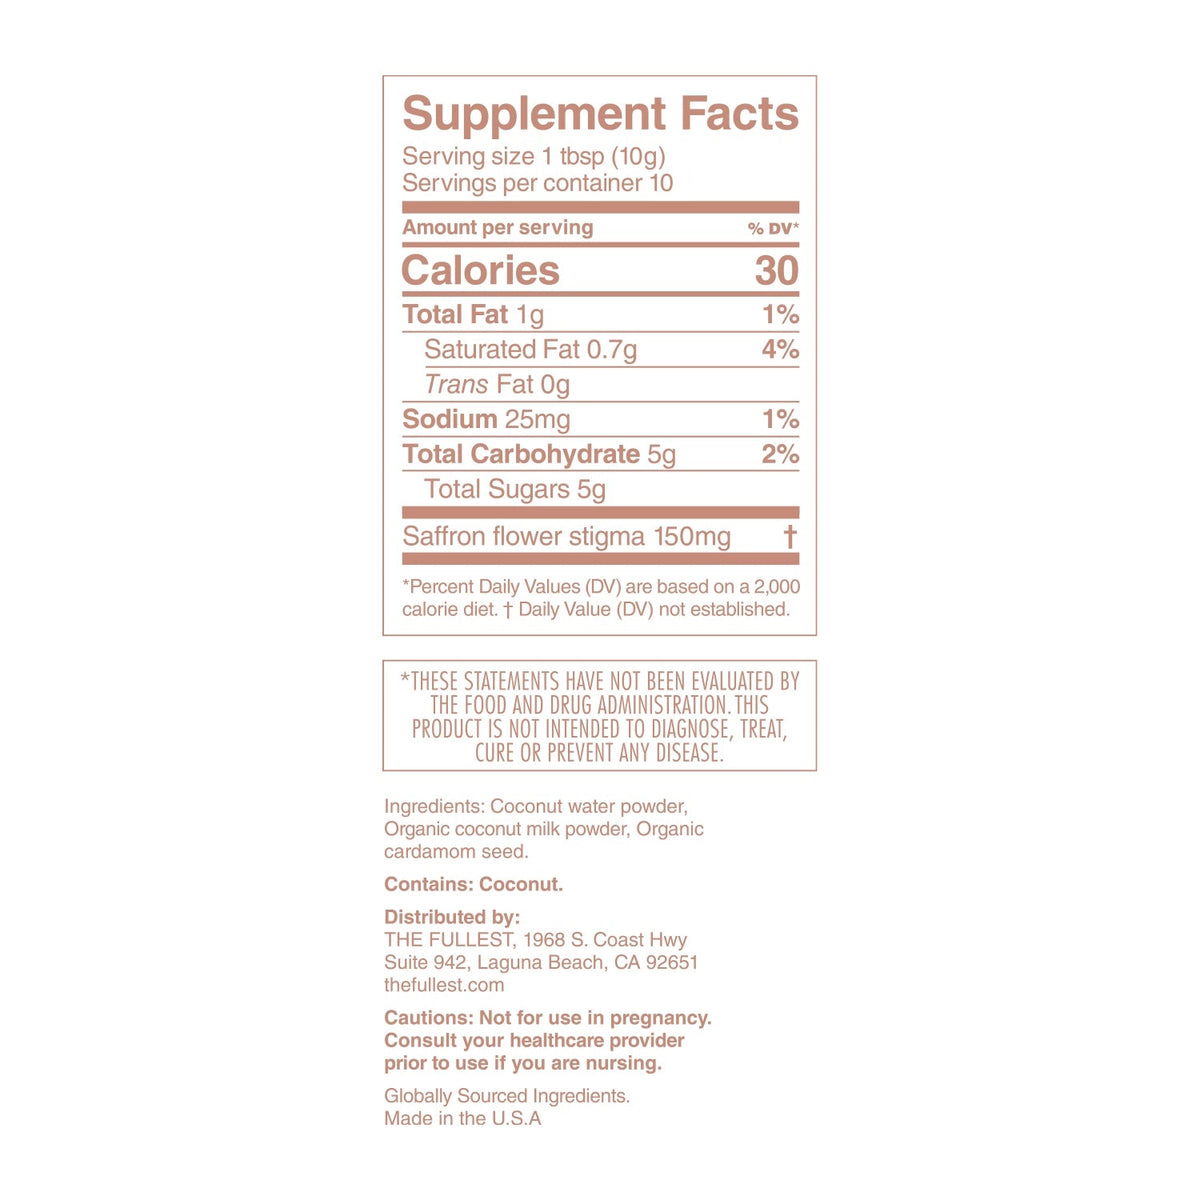 The Supplement Facts label for THE FULLEST&#39;s Warm Feelings 10 Single-Serving Sachets showcases nutritional information for a caffeine-free product that includes ingredients such as coconut water powder and saffron flower. Each serving of this saffron latte contains 30 calories, 1g of fat, and 5g of sugars, designed to help improve mood.